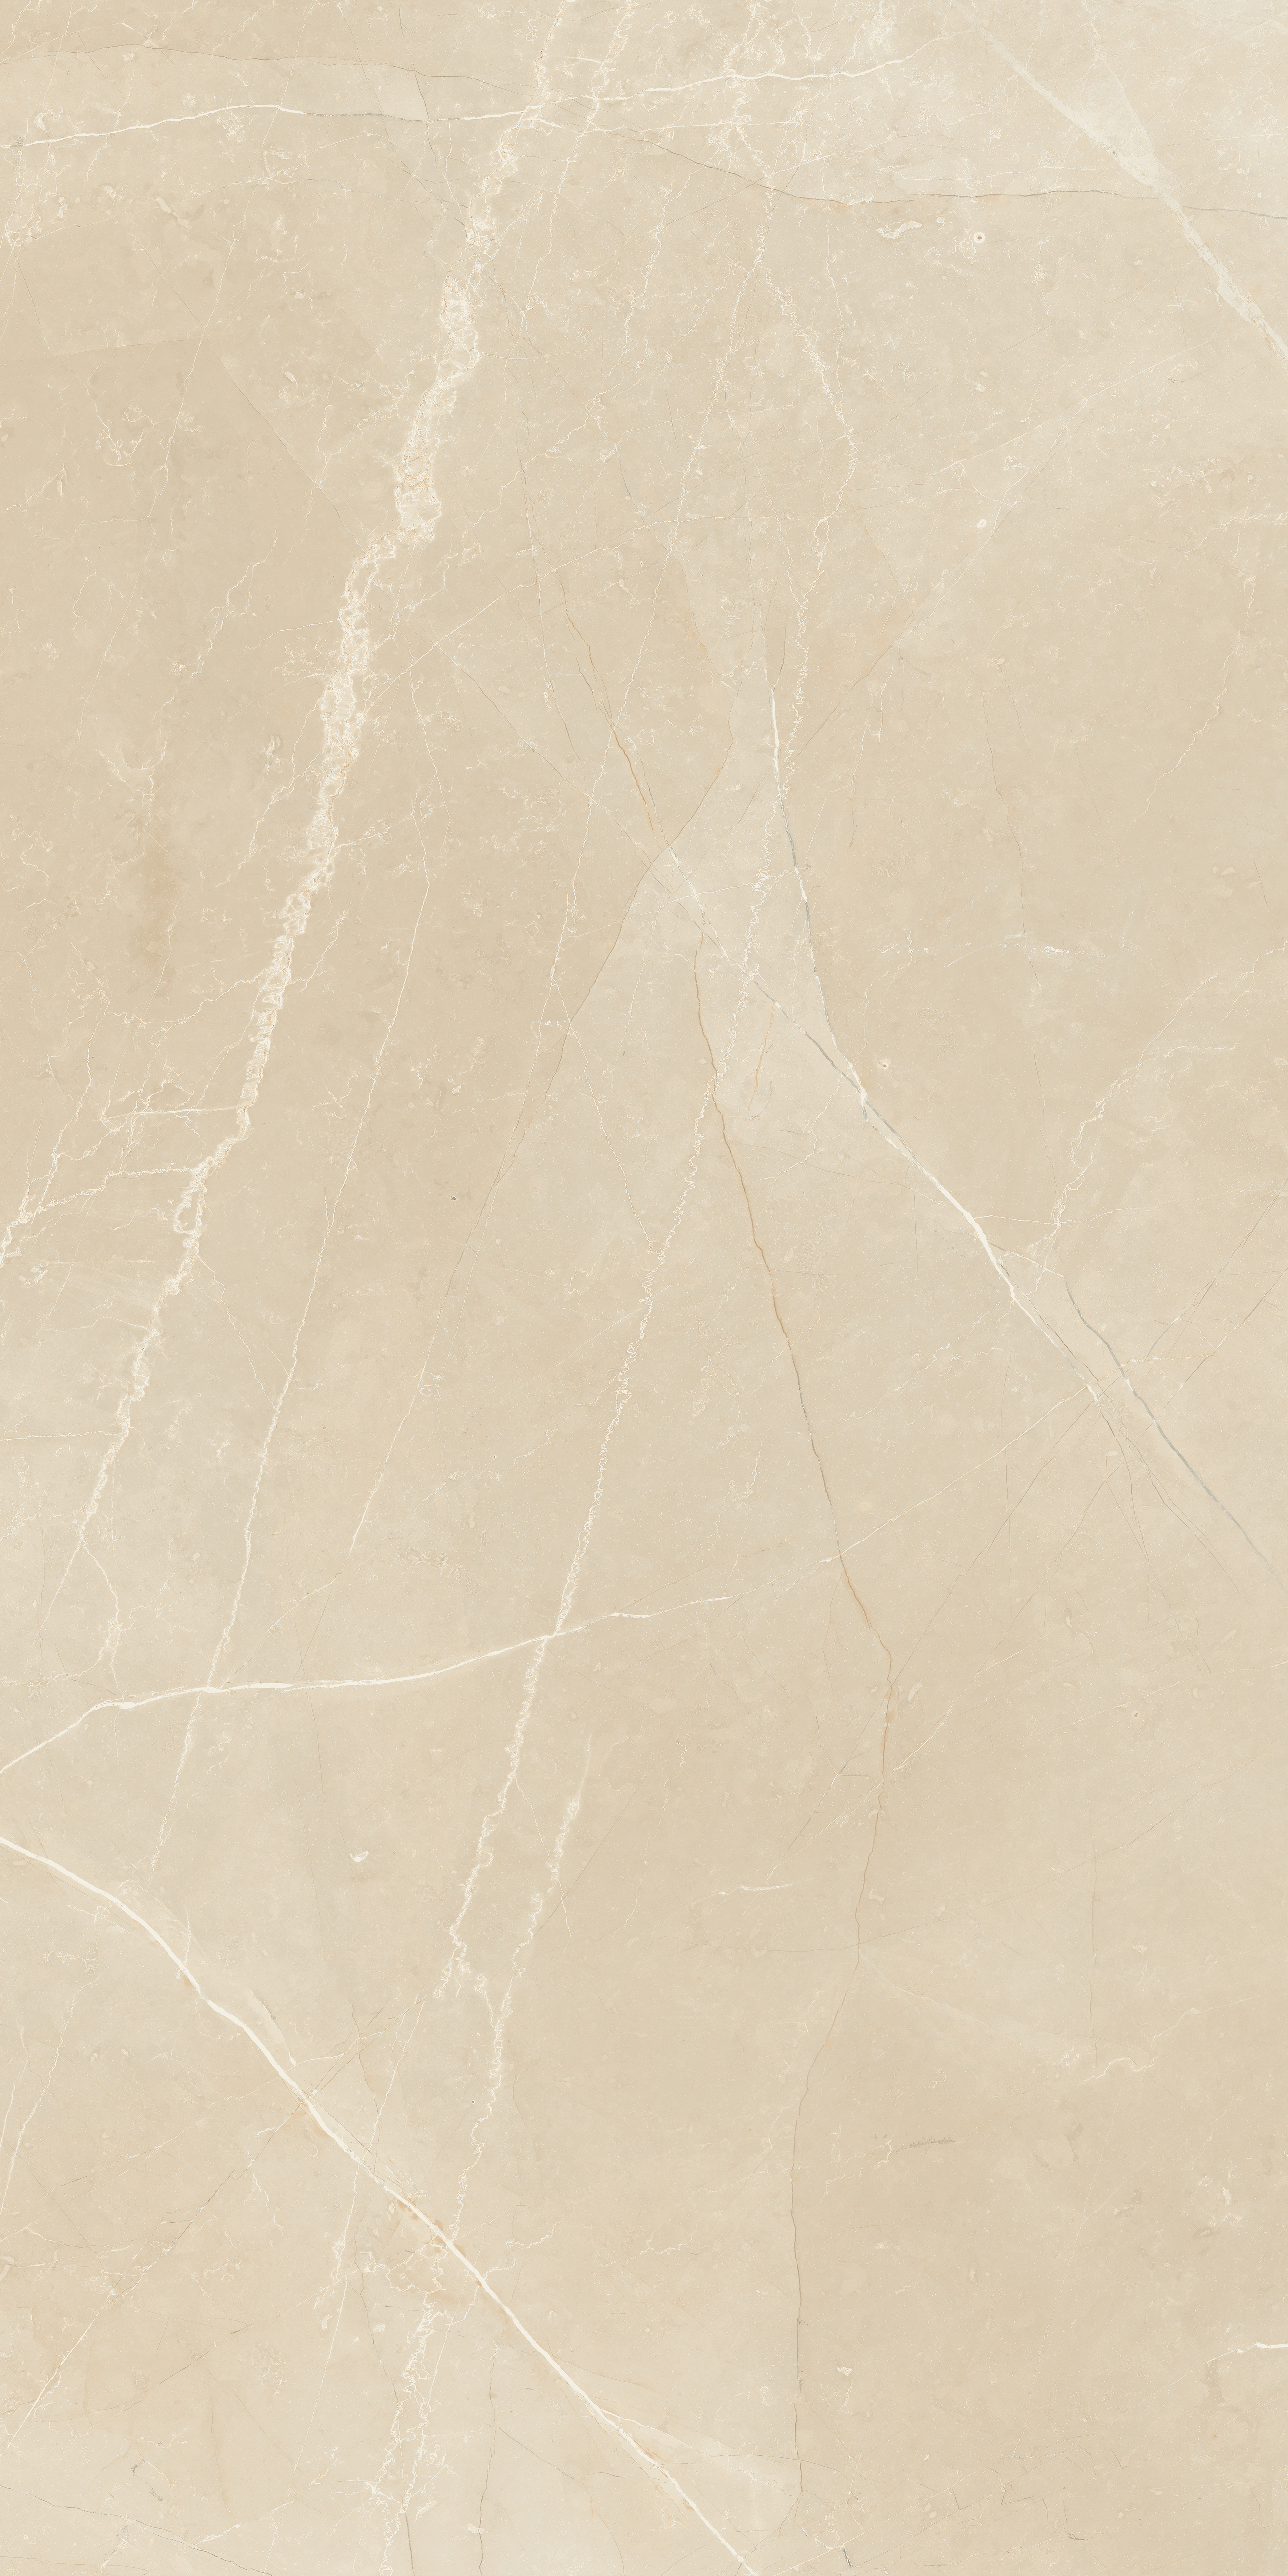 Panaria Trilogy Moon Beige Antibacterial - Lux PGXTY51 60x120cm rectified 9,5mm